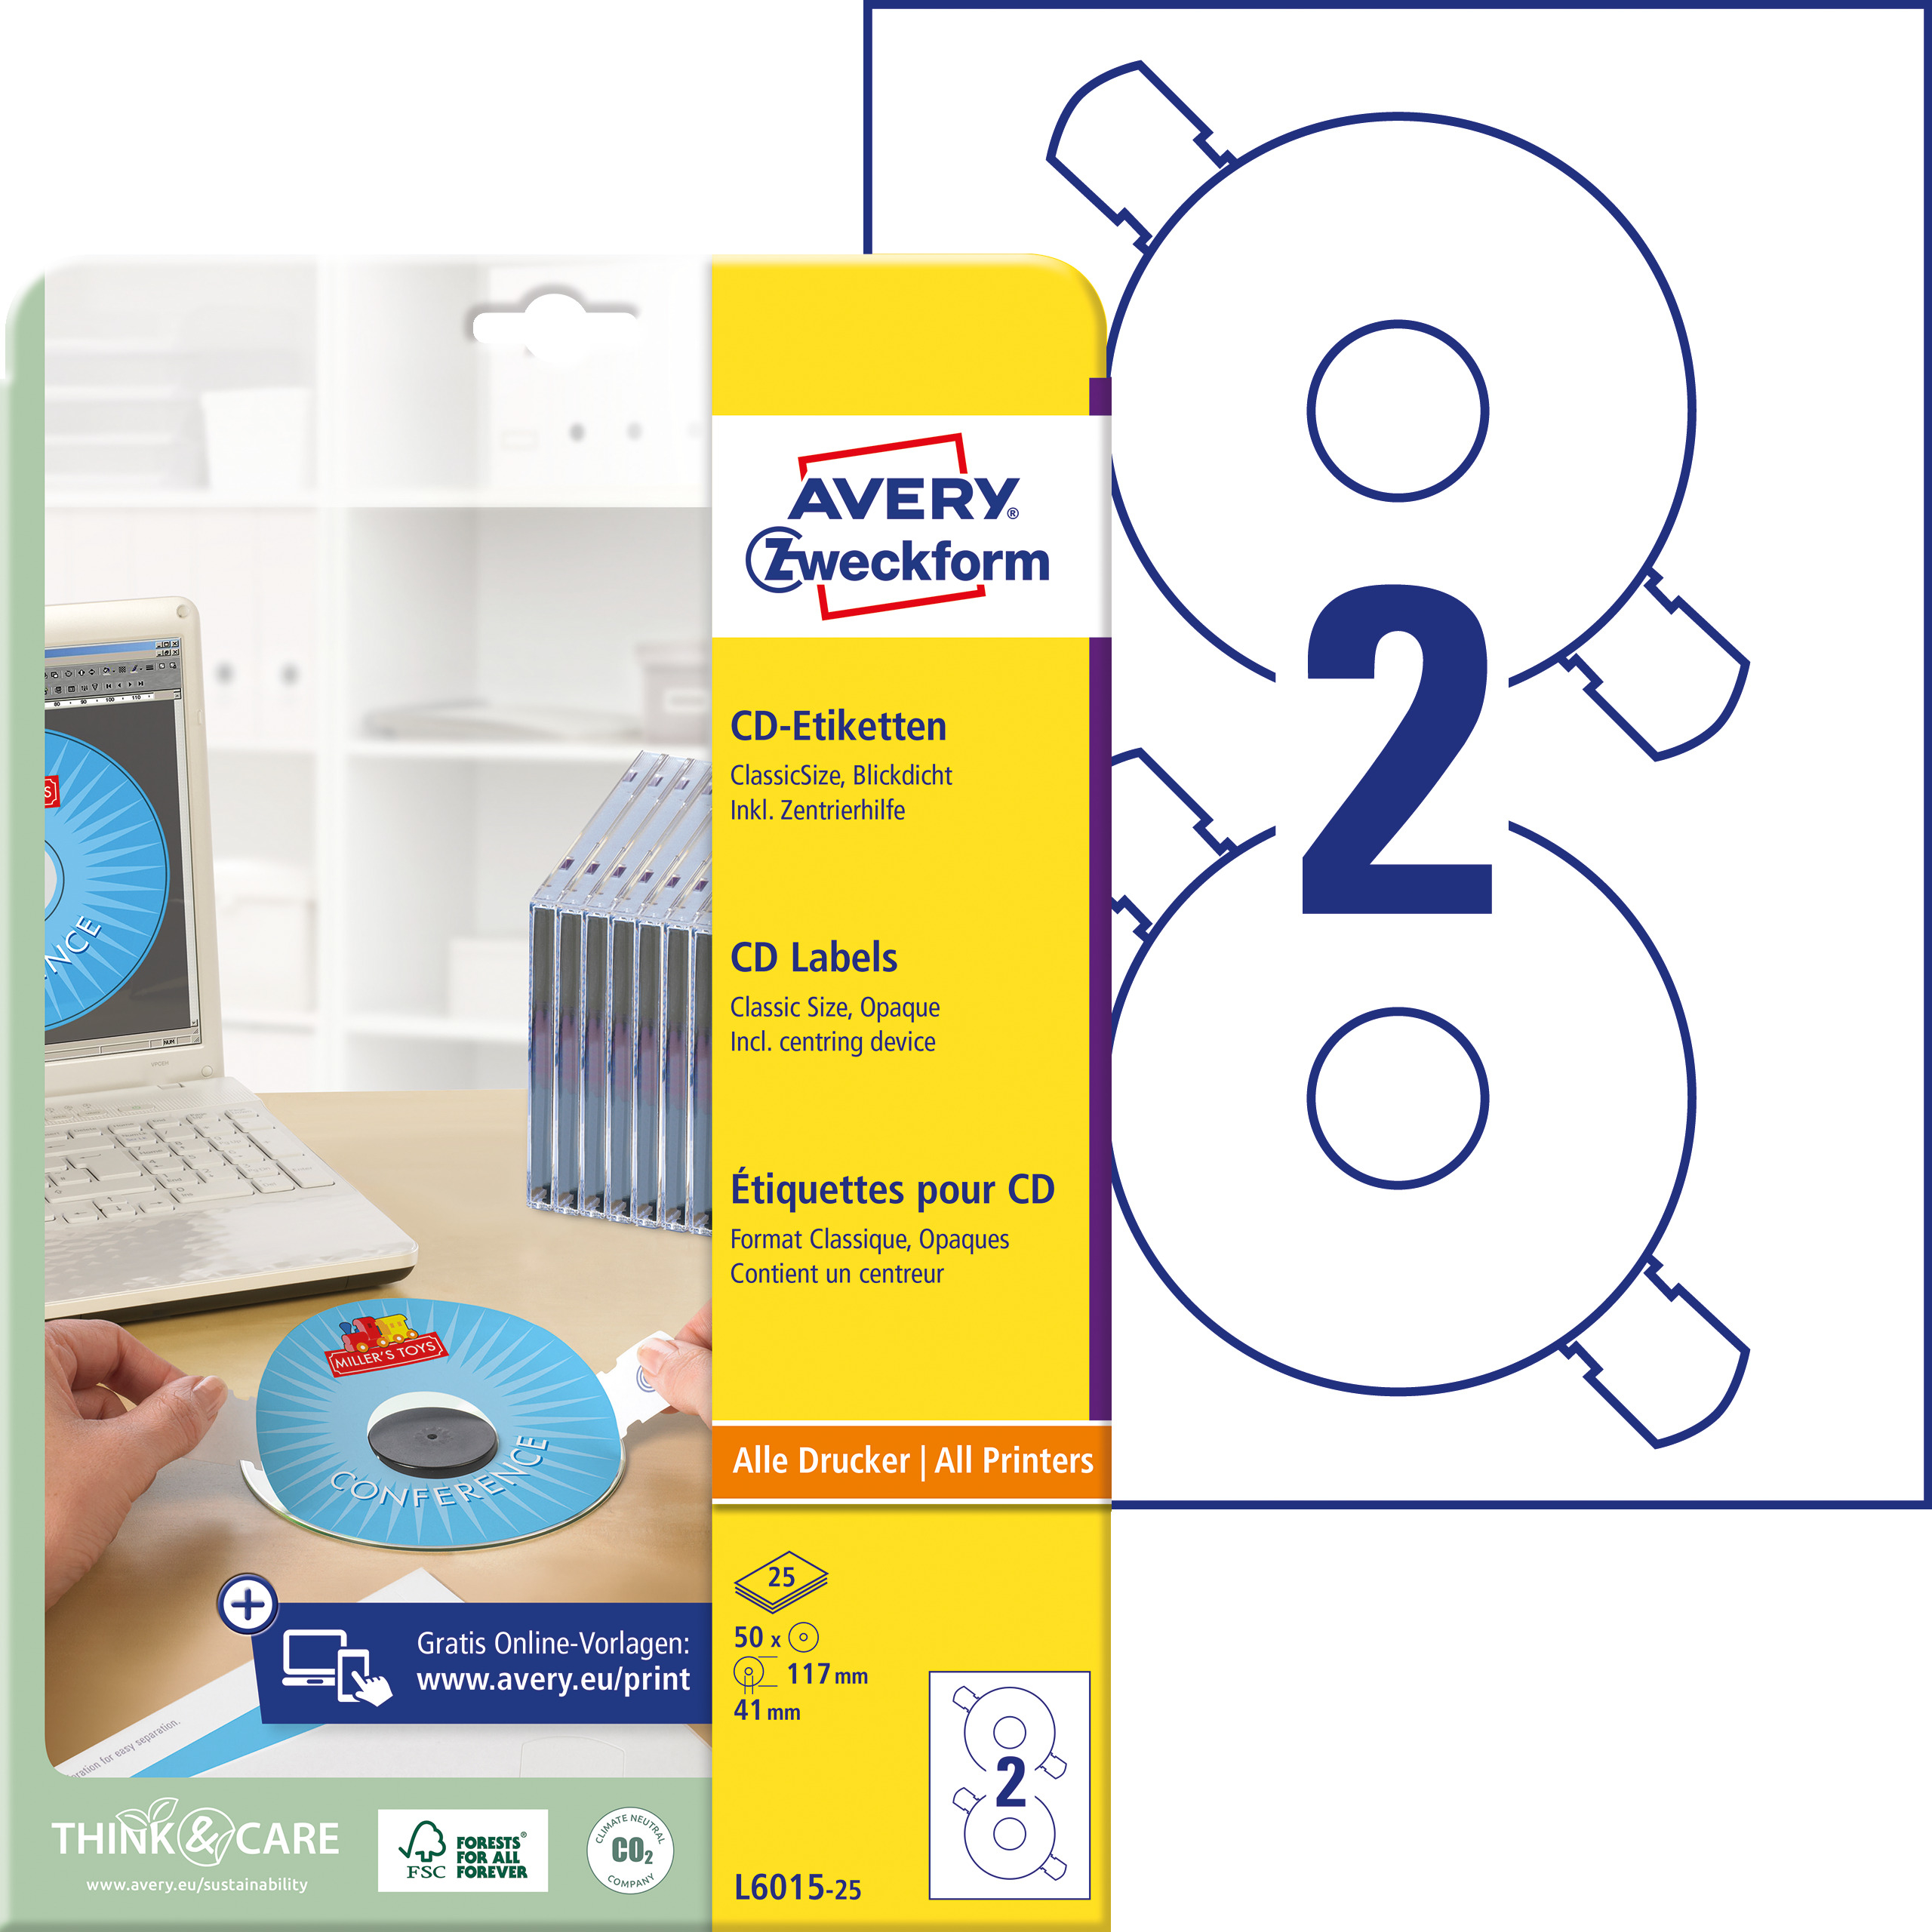 AVERY ZWECKFORM Etiquettes CD 117mm L6015-25 Universel, blanc 25flls./2pcs. Universel, blanc 25flls.